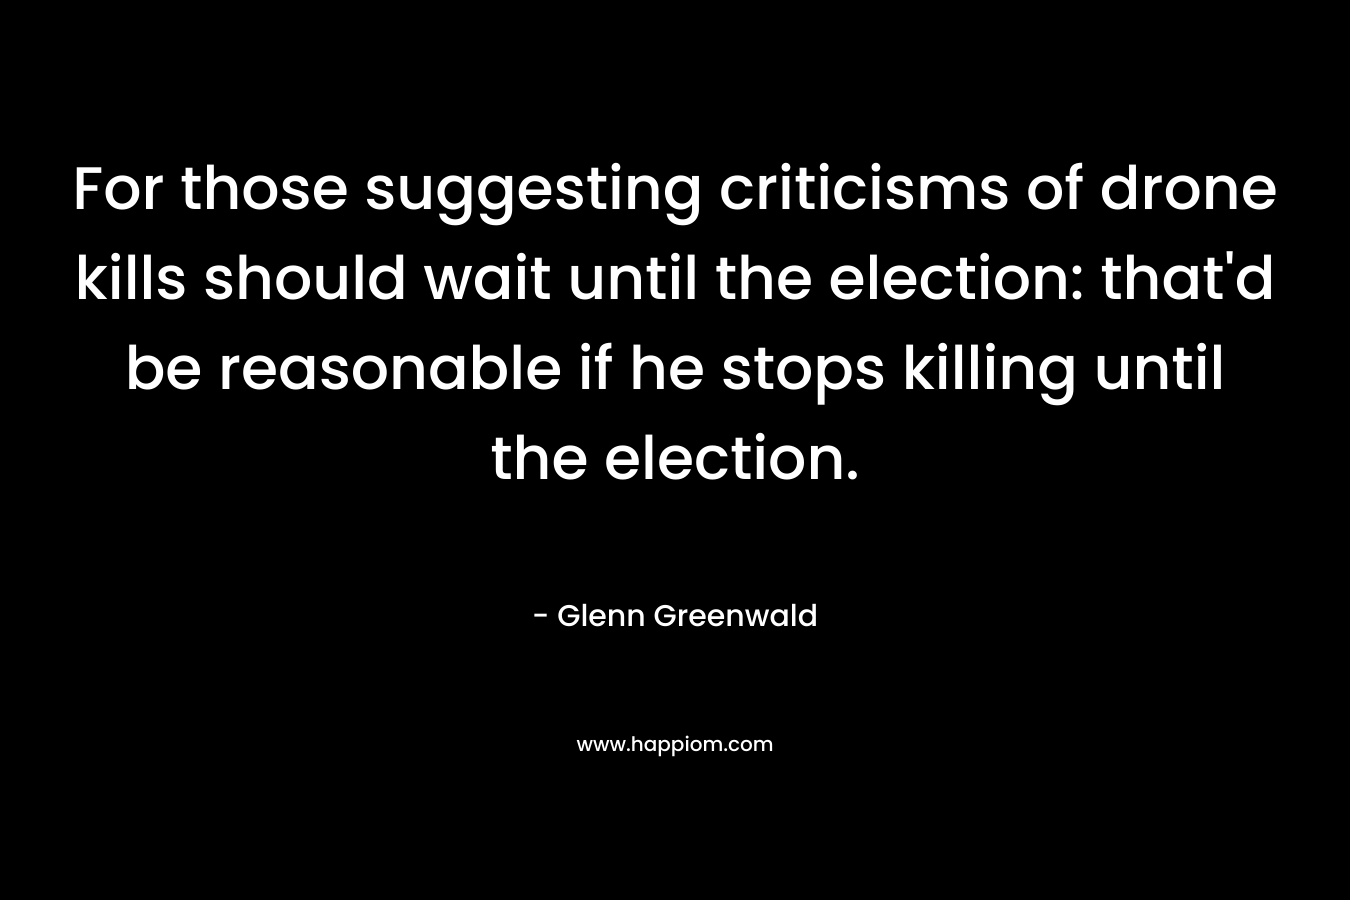 For those suggesting criticisms of drone kills should wait until the election: that'd be reasonable if he stops killing until the election.